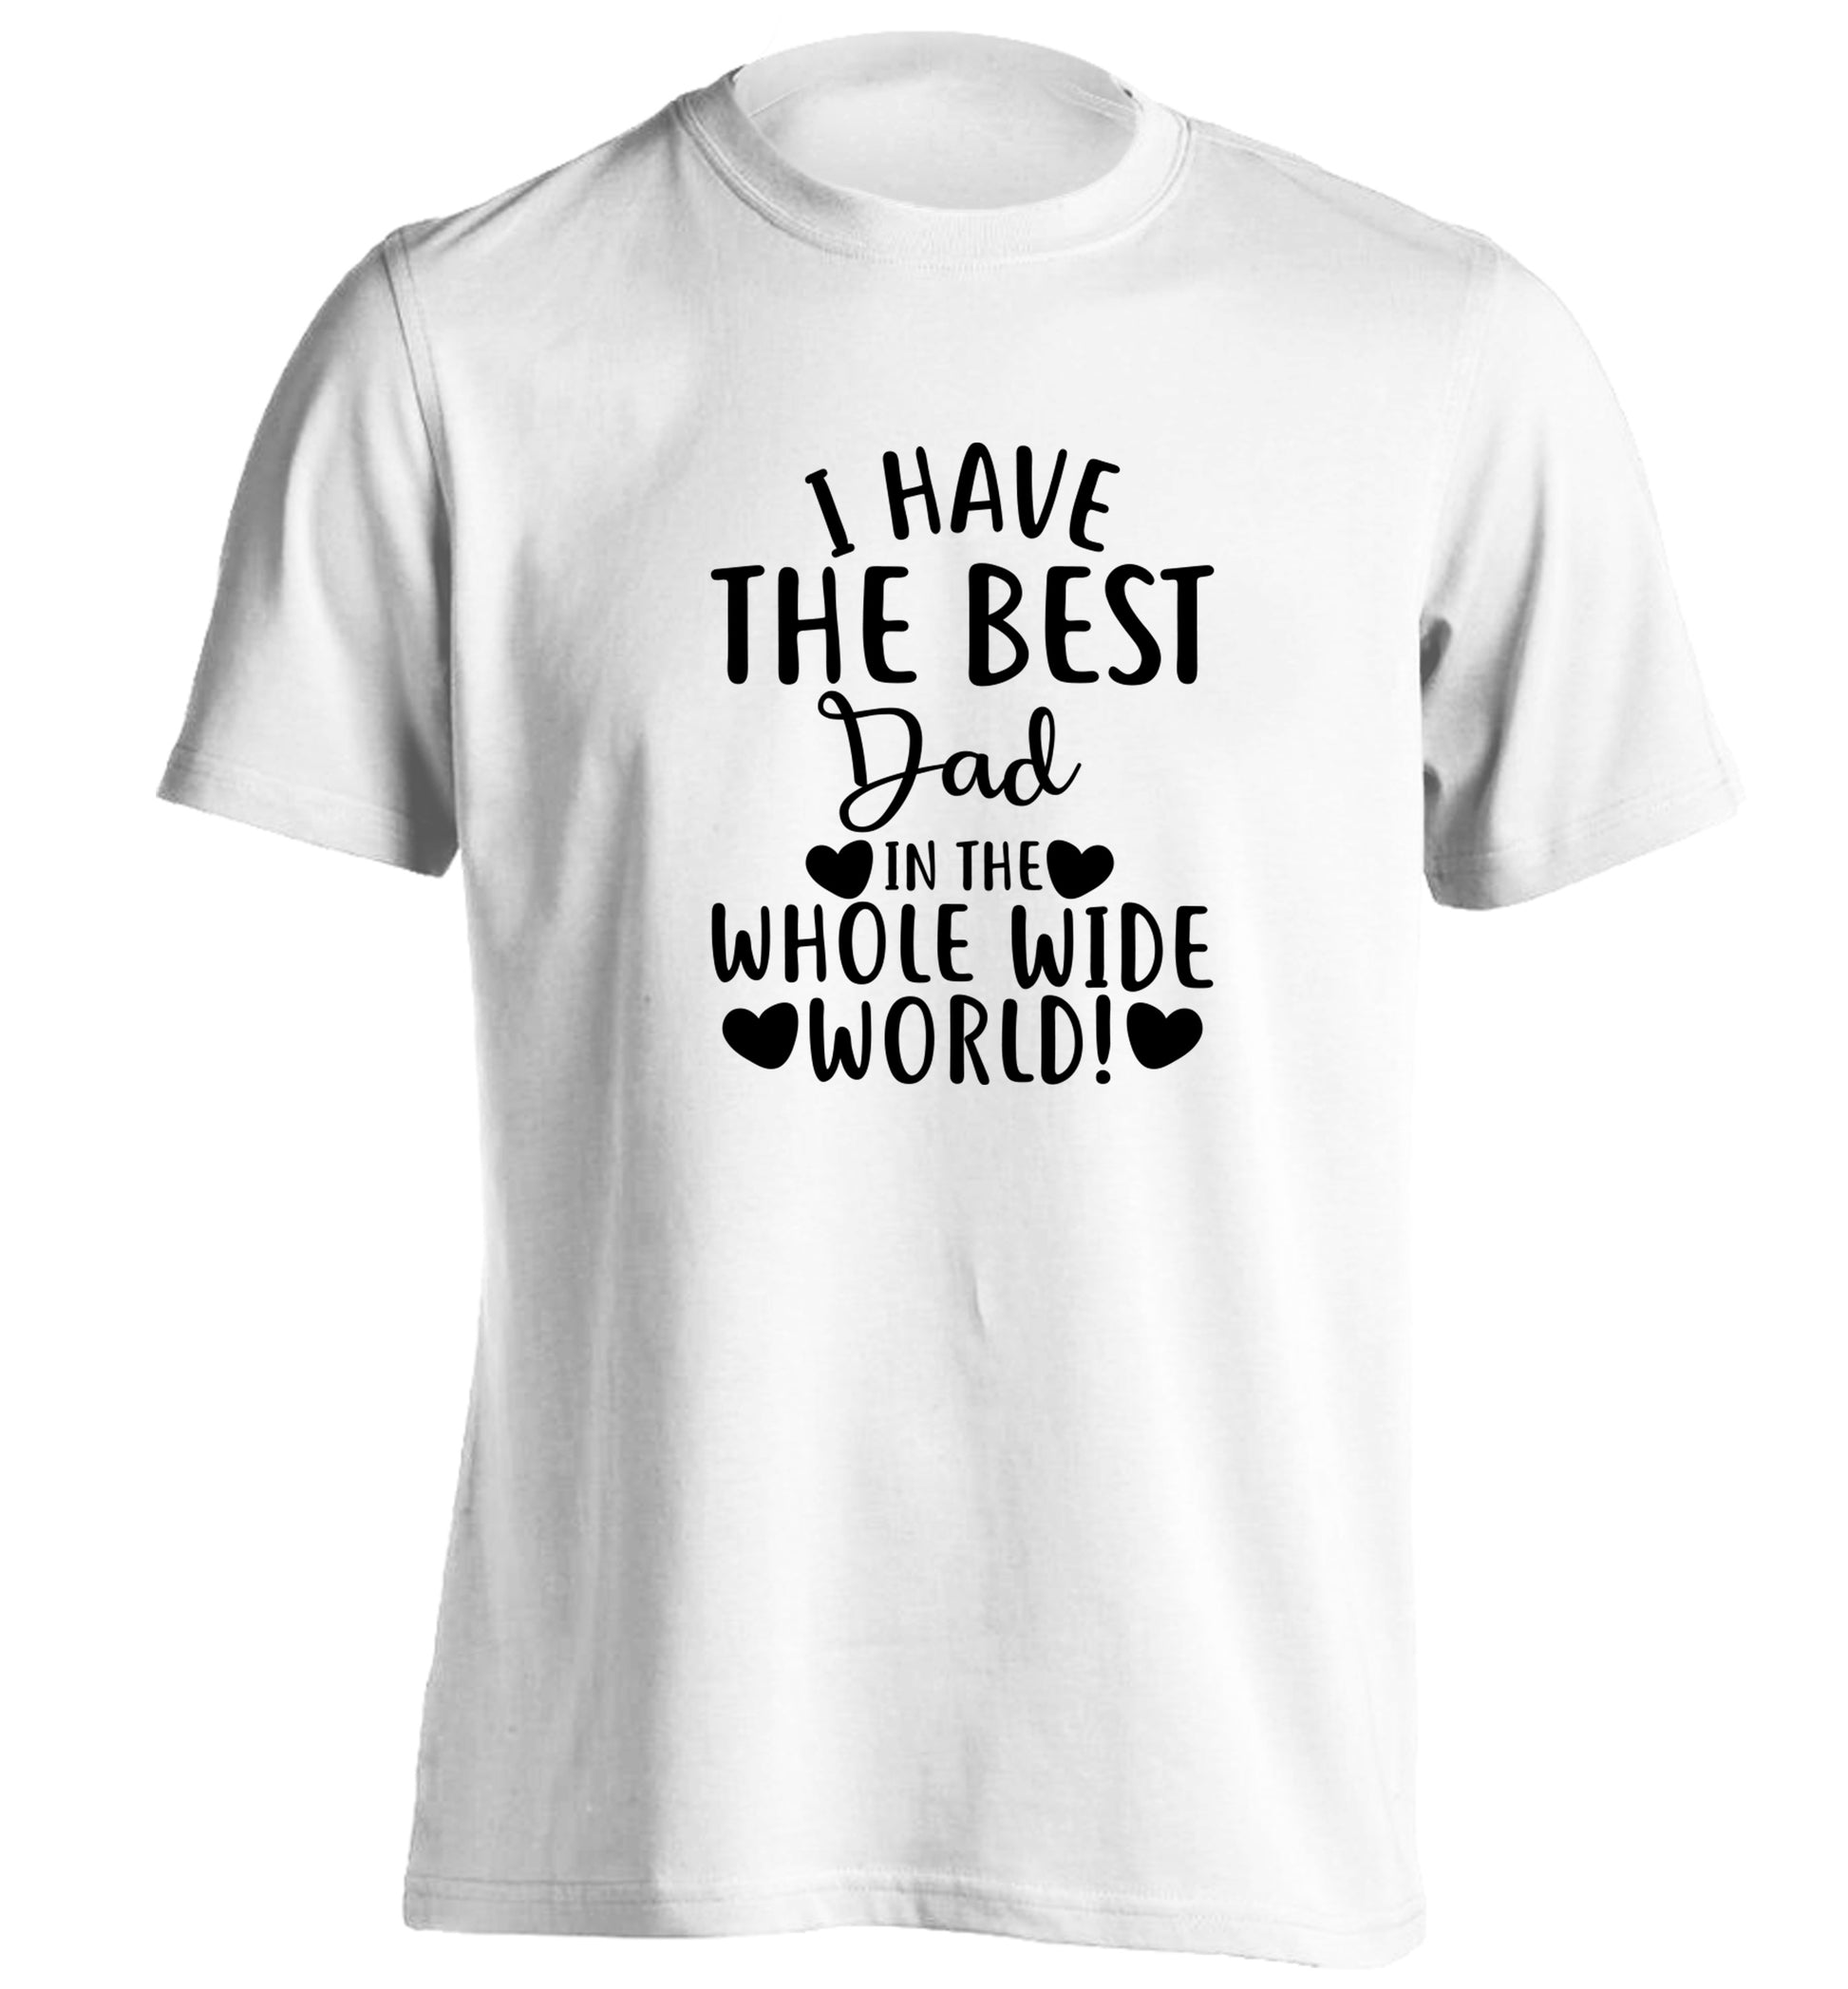 I have the best dad in the whole wide world! adults unisex white Tshirt 2XL